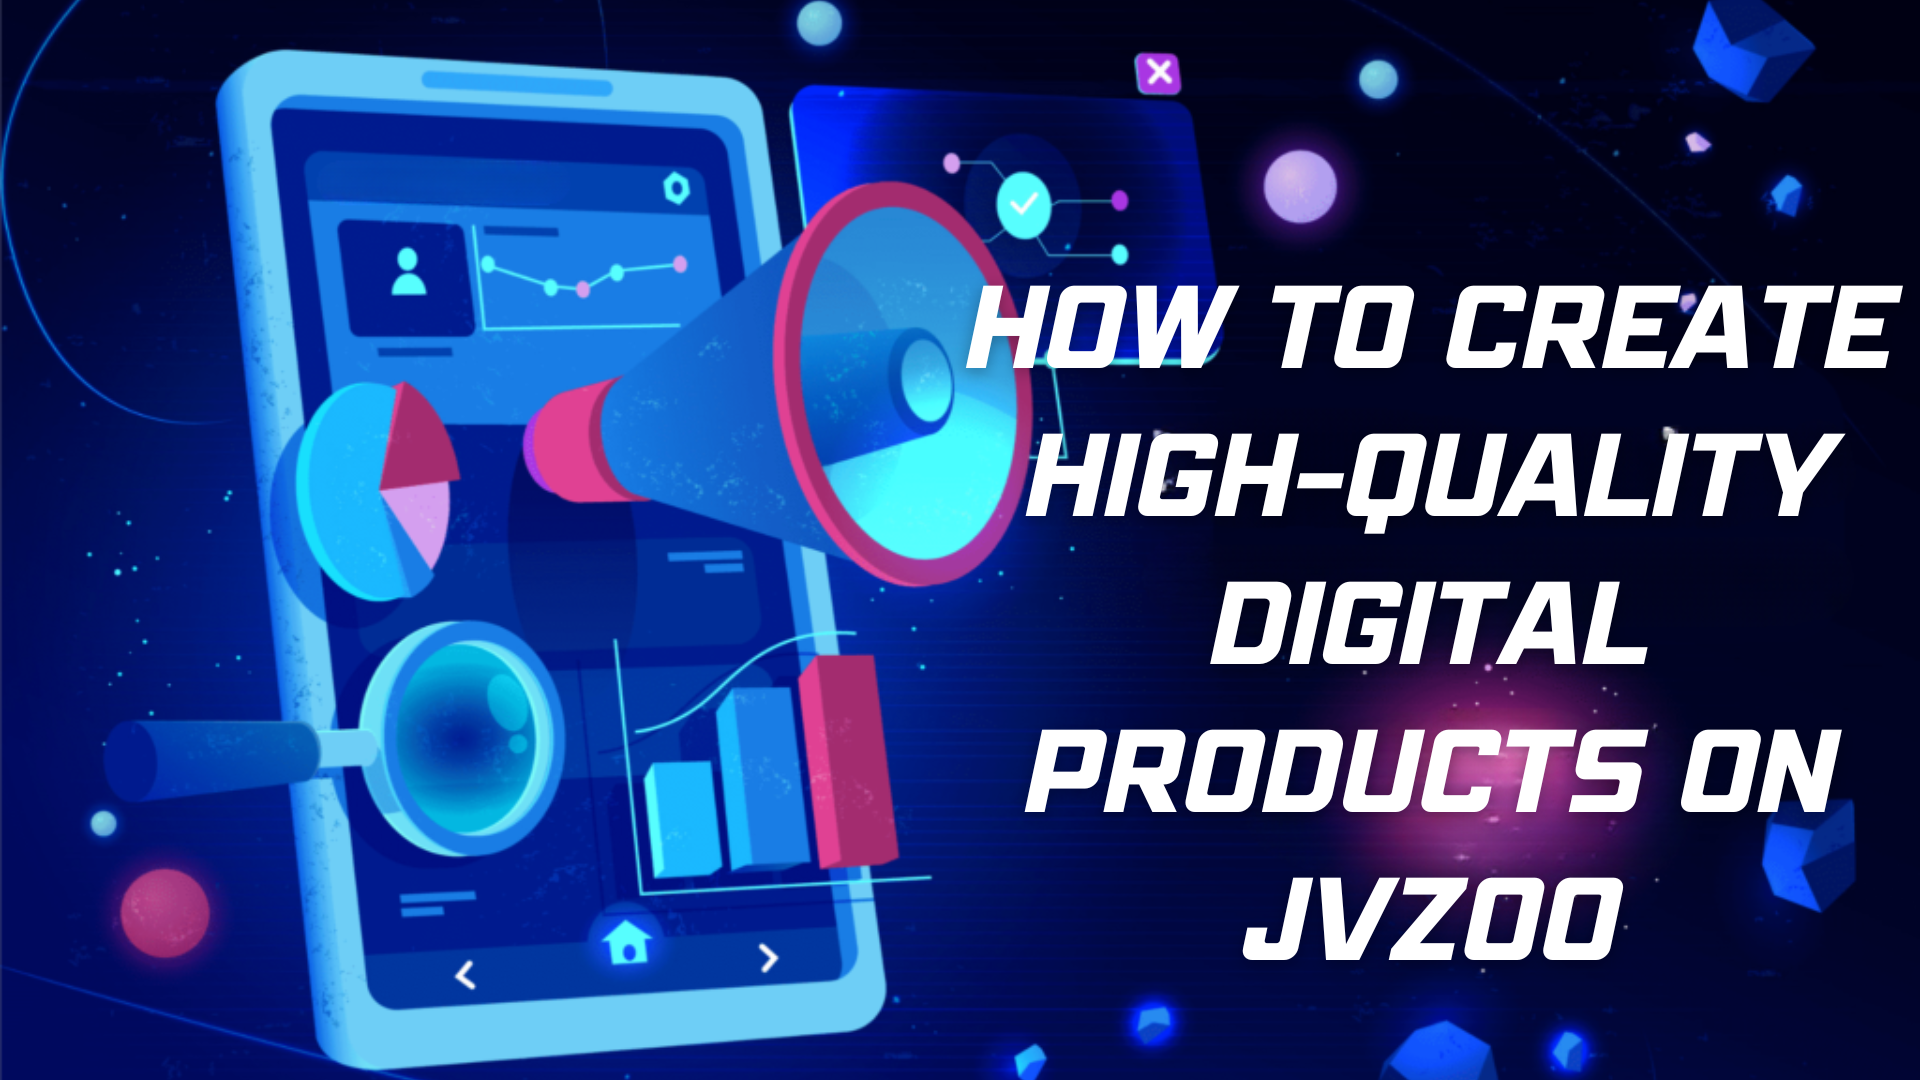 Create High-Quality Digital Products on JVZoo That Solve a Problem